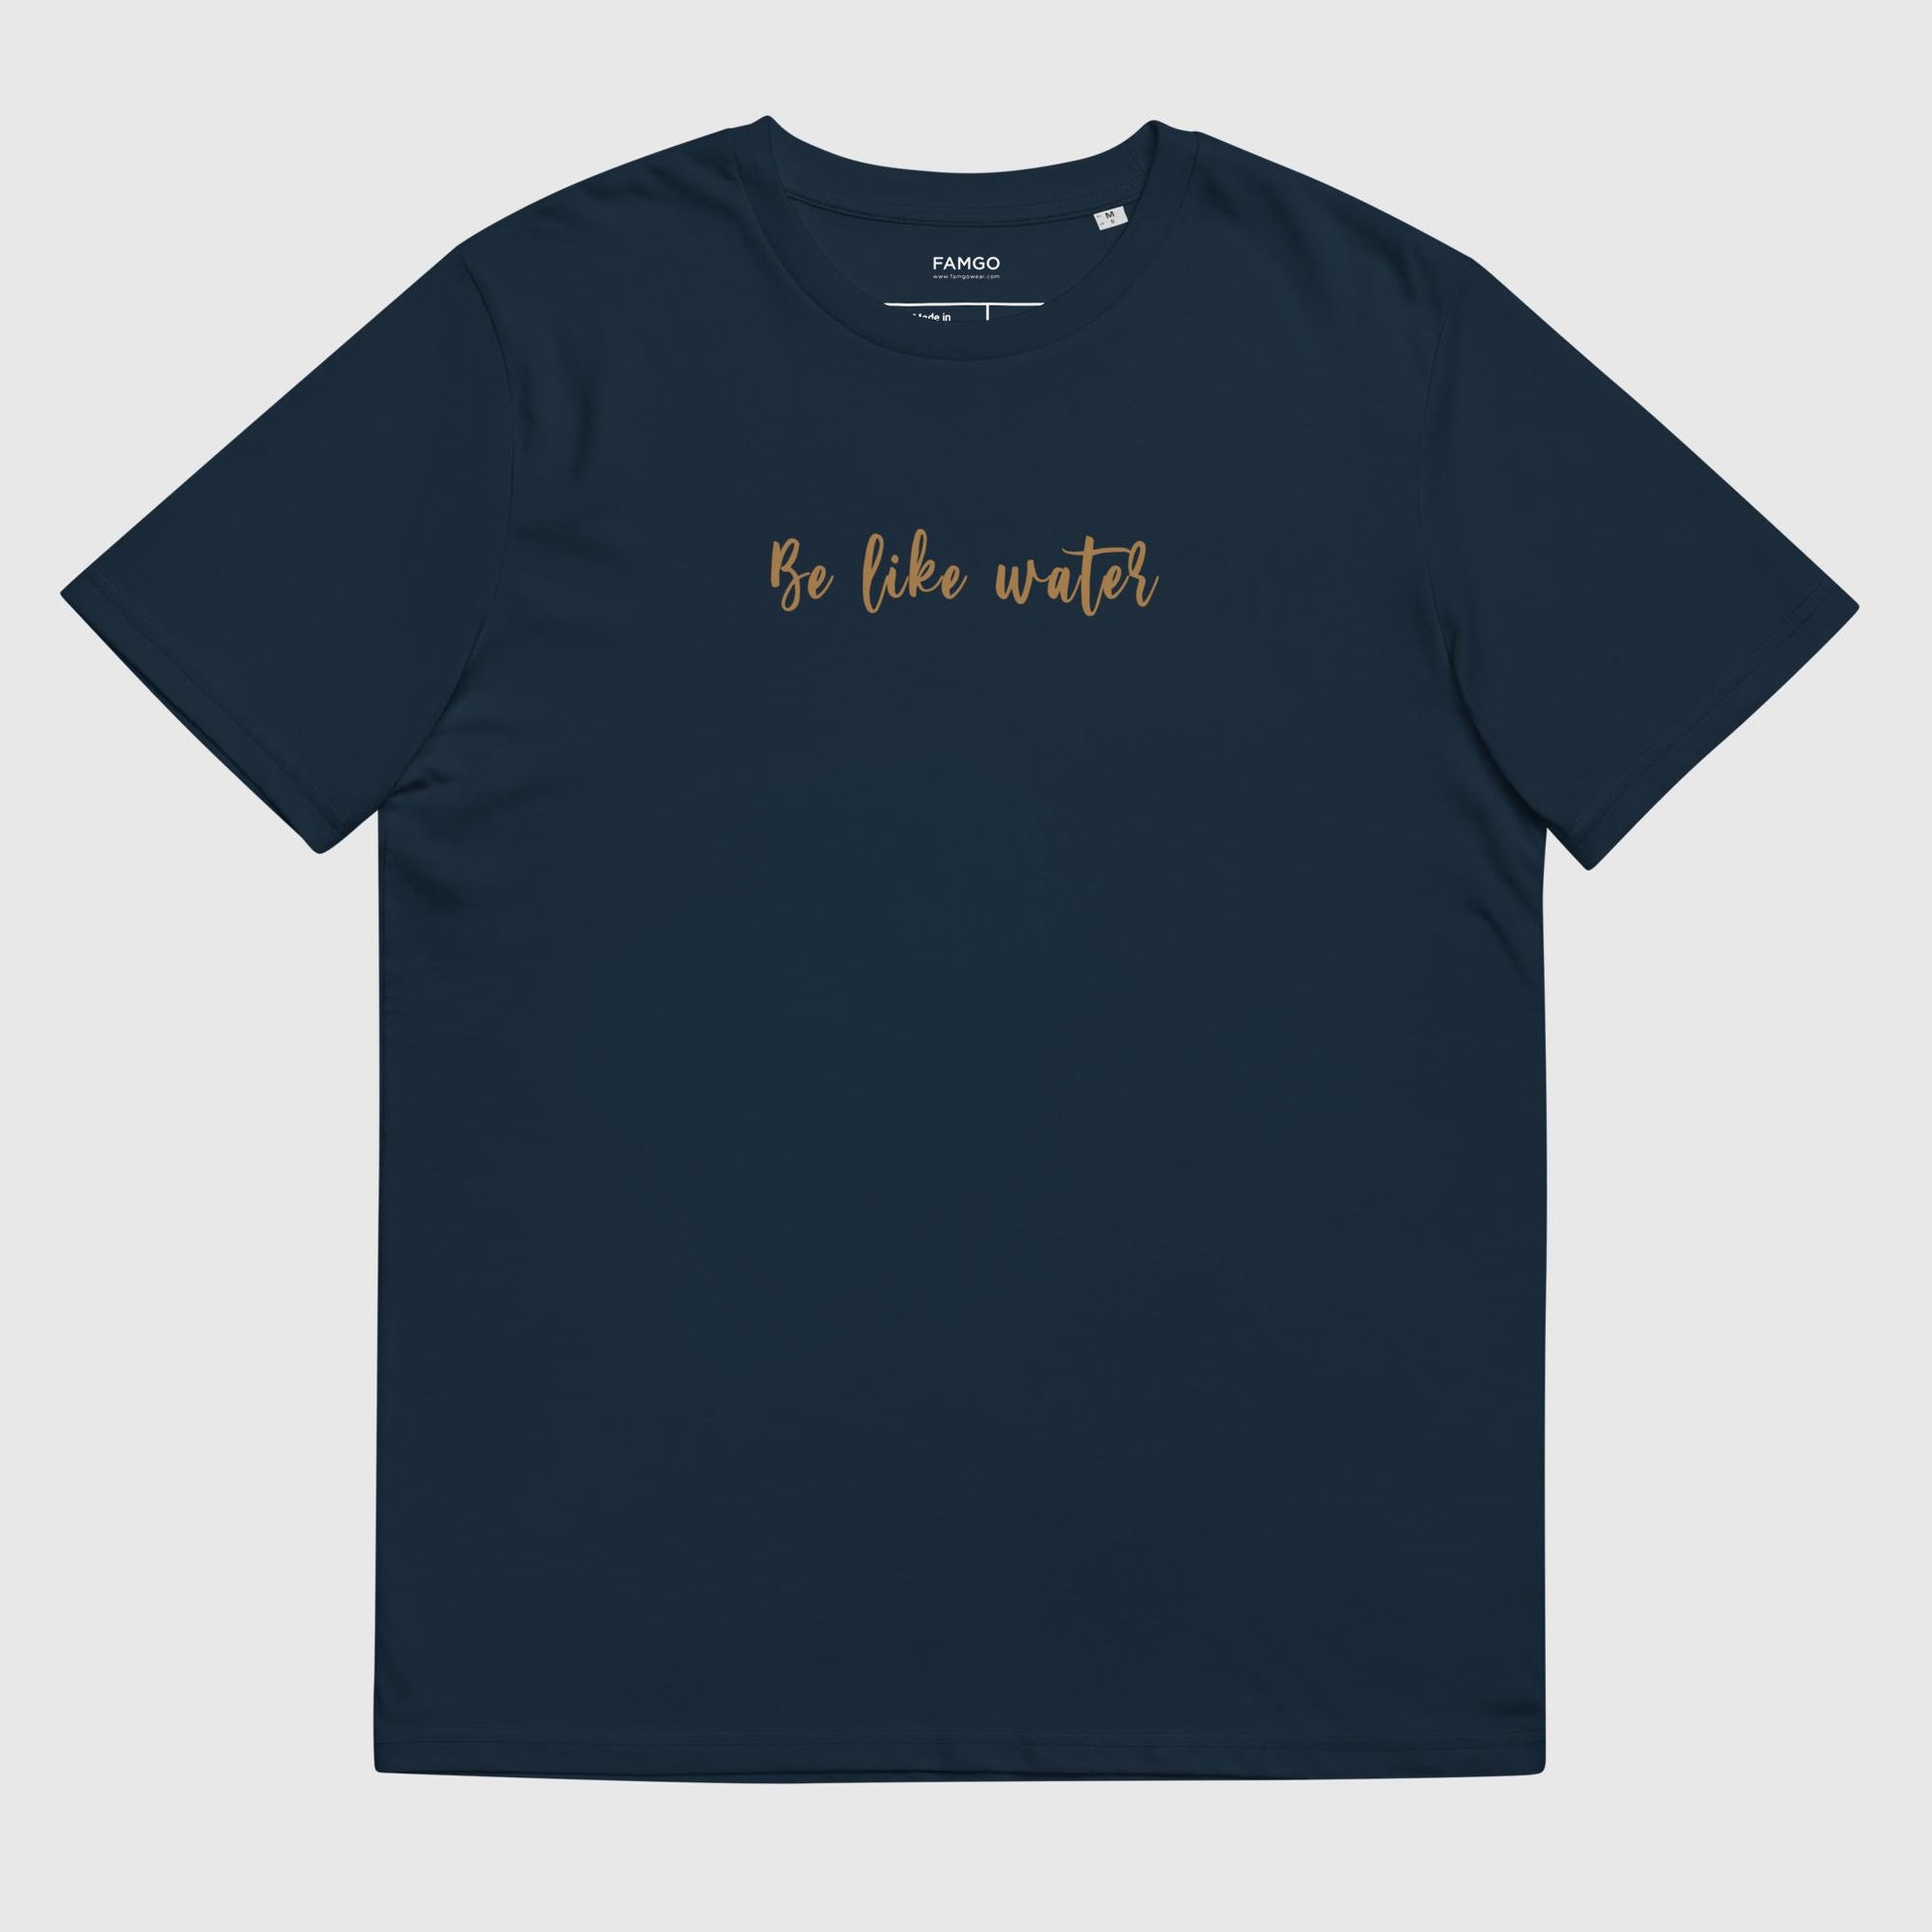 Men's french navy organic cotton t-shirt that features Bruce Lee's inspirational quote, "Be Like Water."